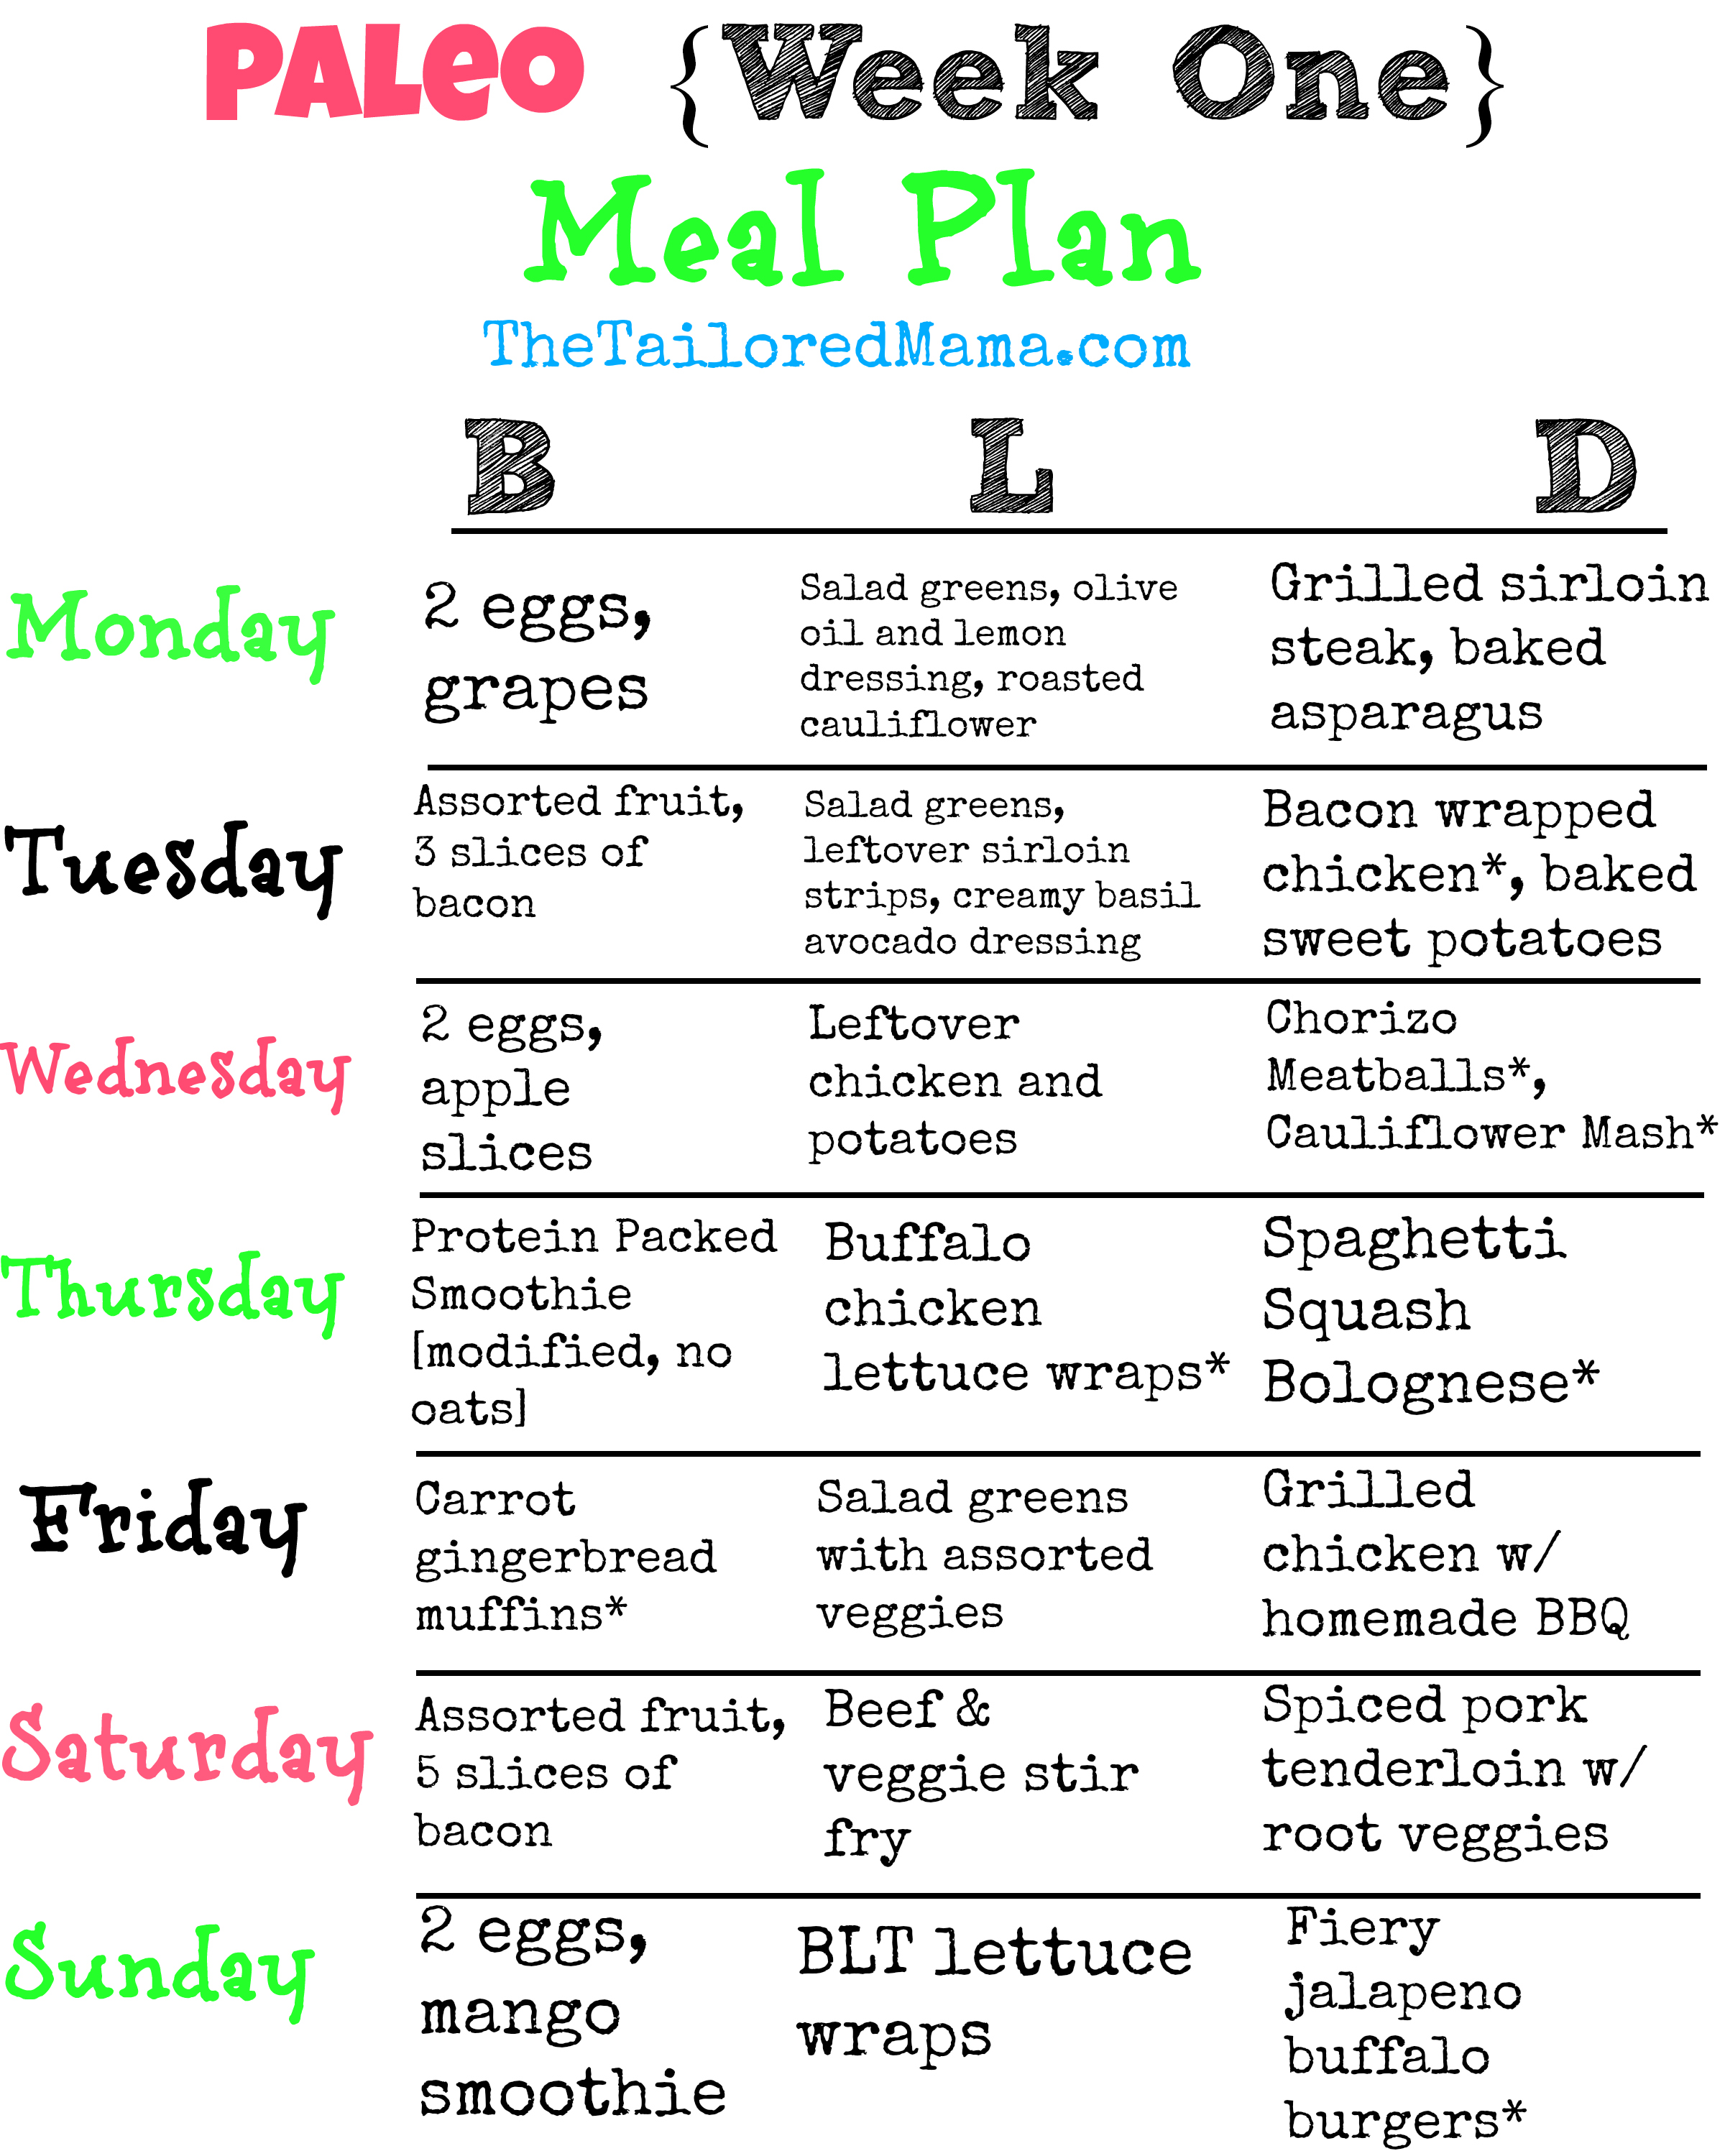 Check out this Paleo week one meal plan to help you jump start healthy